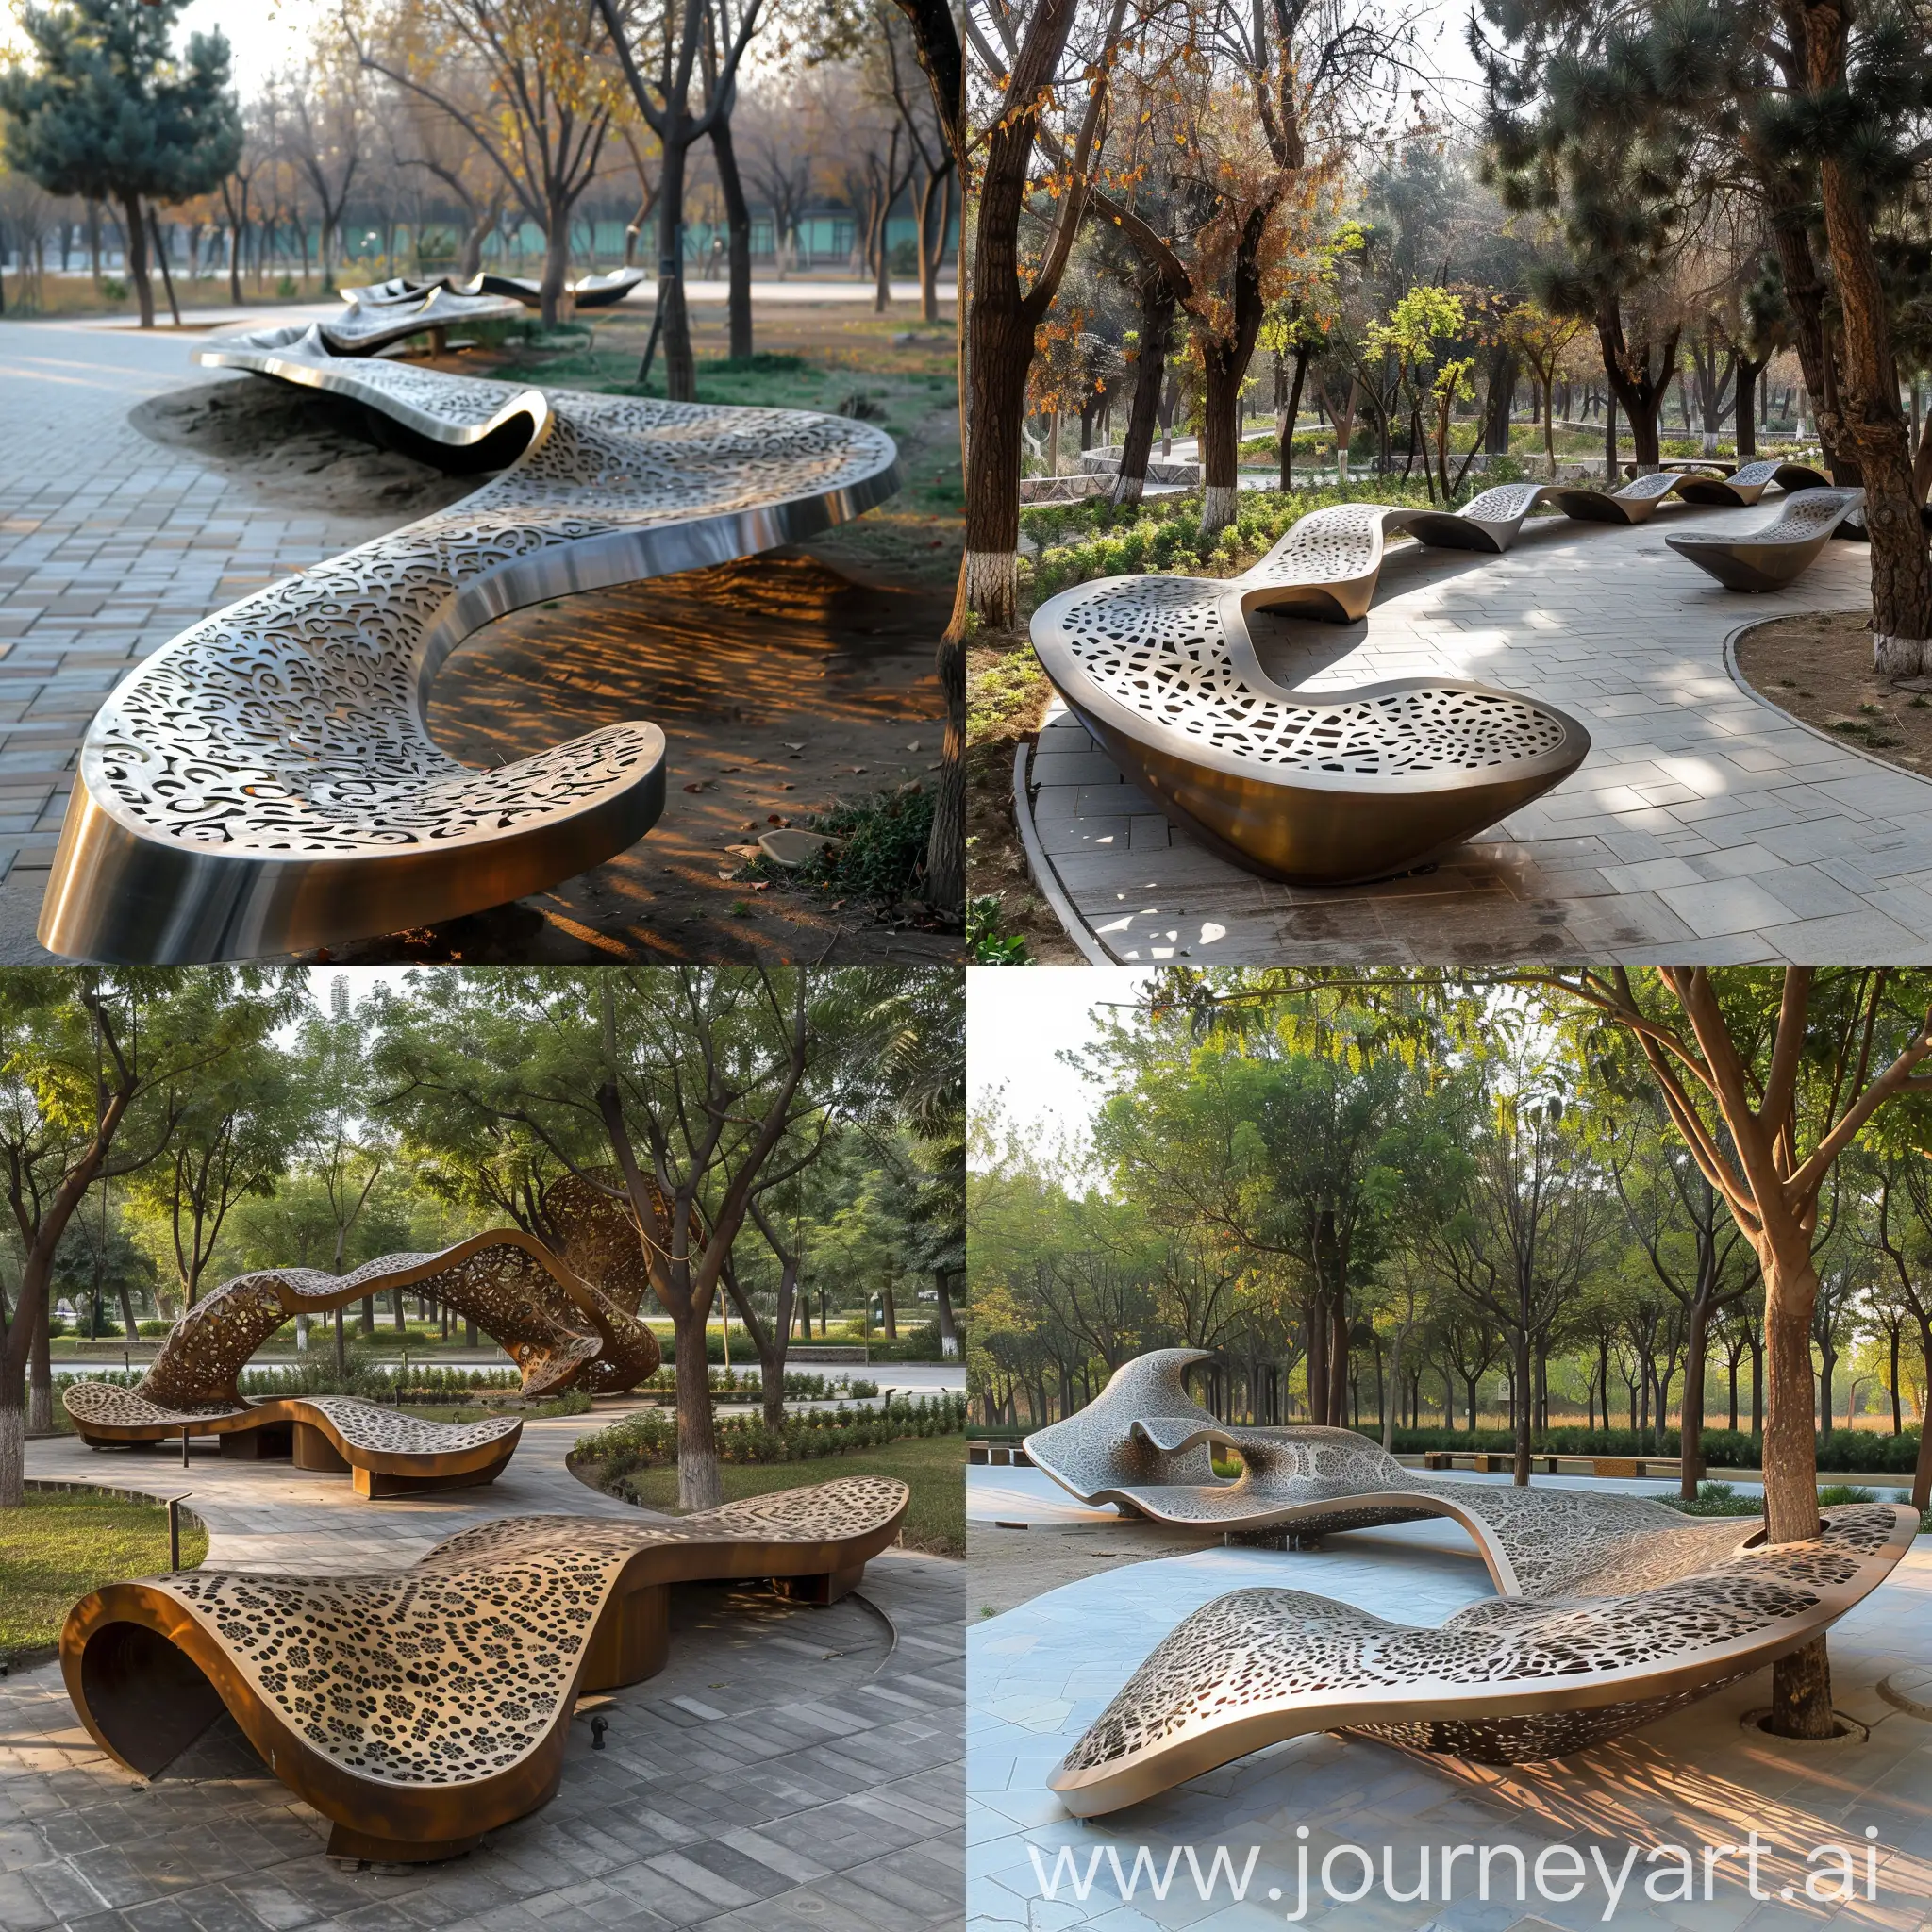 minimal Modular Seating:Create modular seating for Mellat Park in Tehran, Iran, featuring organic forms with flowing lines inspired by the Root Bench and Wooden Wave Pavilion. The seating should have laser-cut Persian patterns visible from the top view, made from metal sheets (stainless steel or aluminum), with a natural metal finish or powder-coated in earthy tones. The design should be modular, allowing for various configurations, and placed in clusters to promote social interaction. The seating should be durable, culturally relevant, and flexible, incorporating minimalist and modern design principles.							Form & Shape:Organic forms with flowing lines.Laser-cut Persian patterns visible from the top view.				Structure:Individual modules that can be combined in various configurations.Durable construction using metal sheets.		Dimensions:Standard module size: 1 meter x 1 meter.									Materials:Stainless steel or aluminum for durability and ease of maintenance.							Color:Natural metal finish or powder-coated in earthy tones.								Features:Modular Flexibility: Can be rearranged to suit different spaces and needs.Persian Patterns: Subtle incorporation of cultural elements.														Location:Throughout Mellat Park, in clusters to promote social interaction.